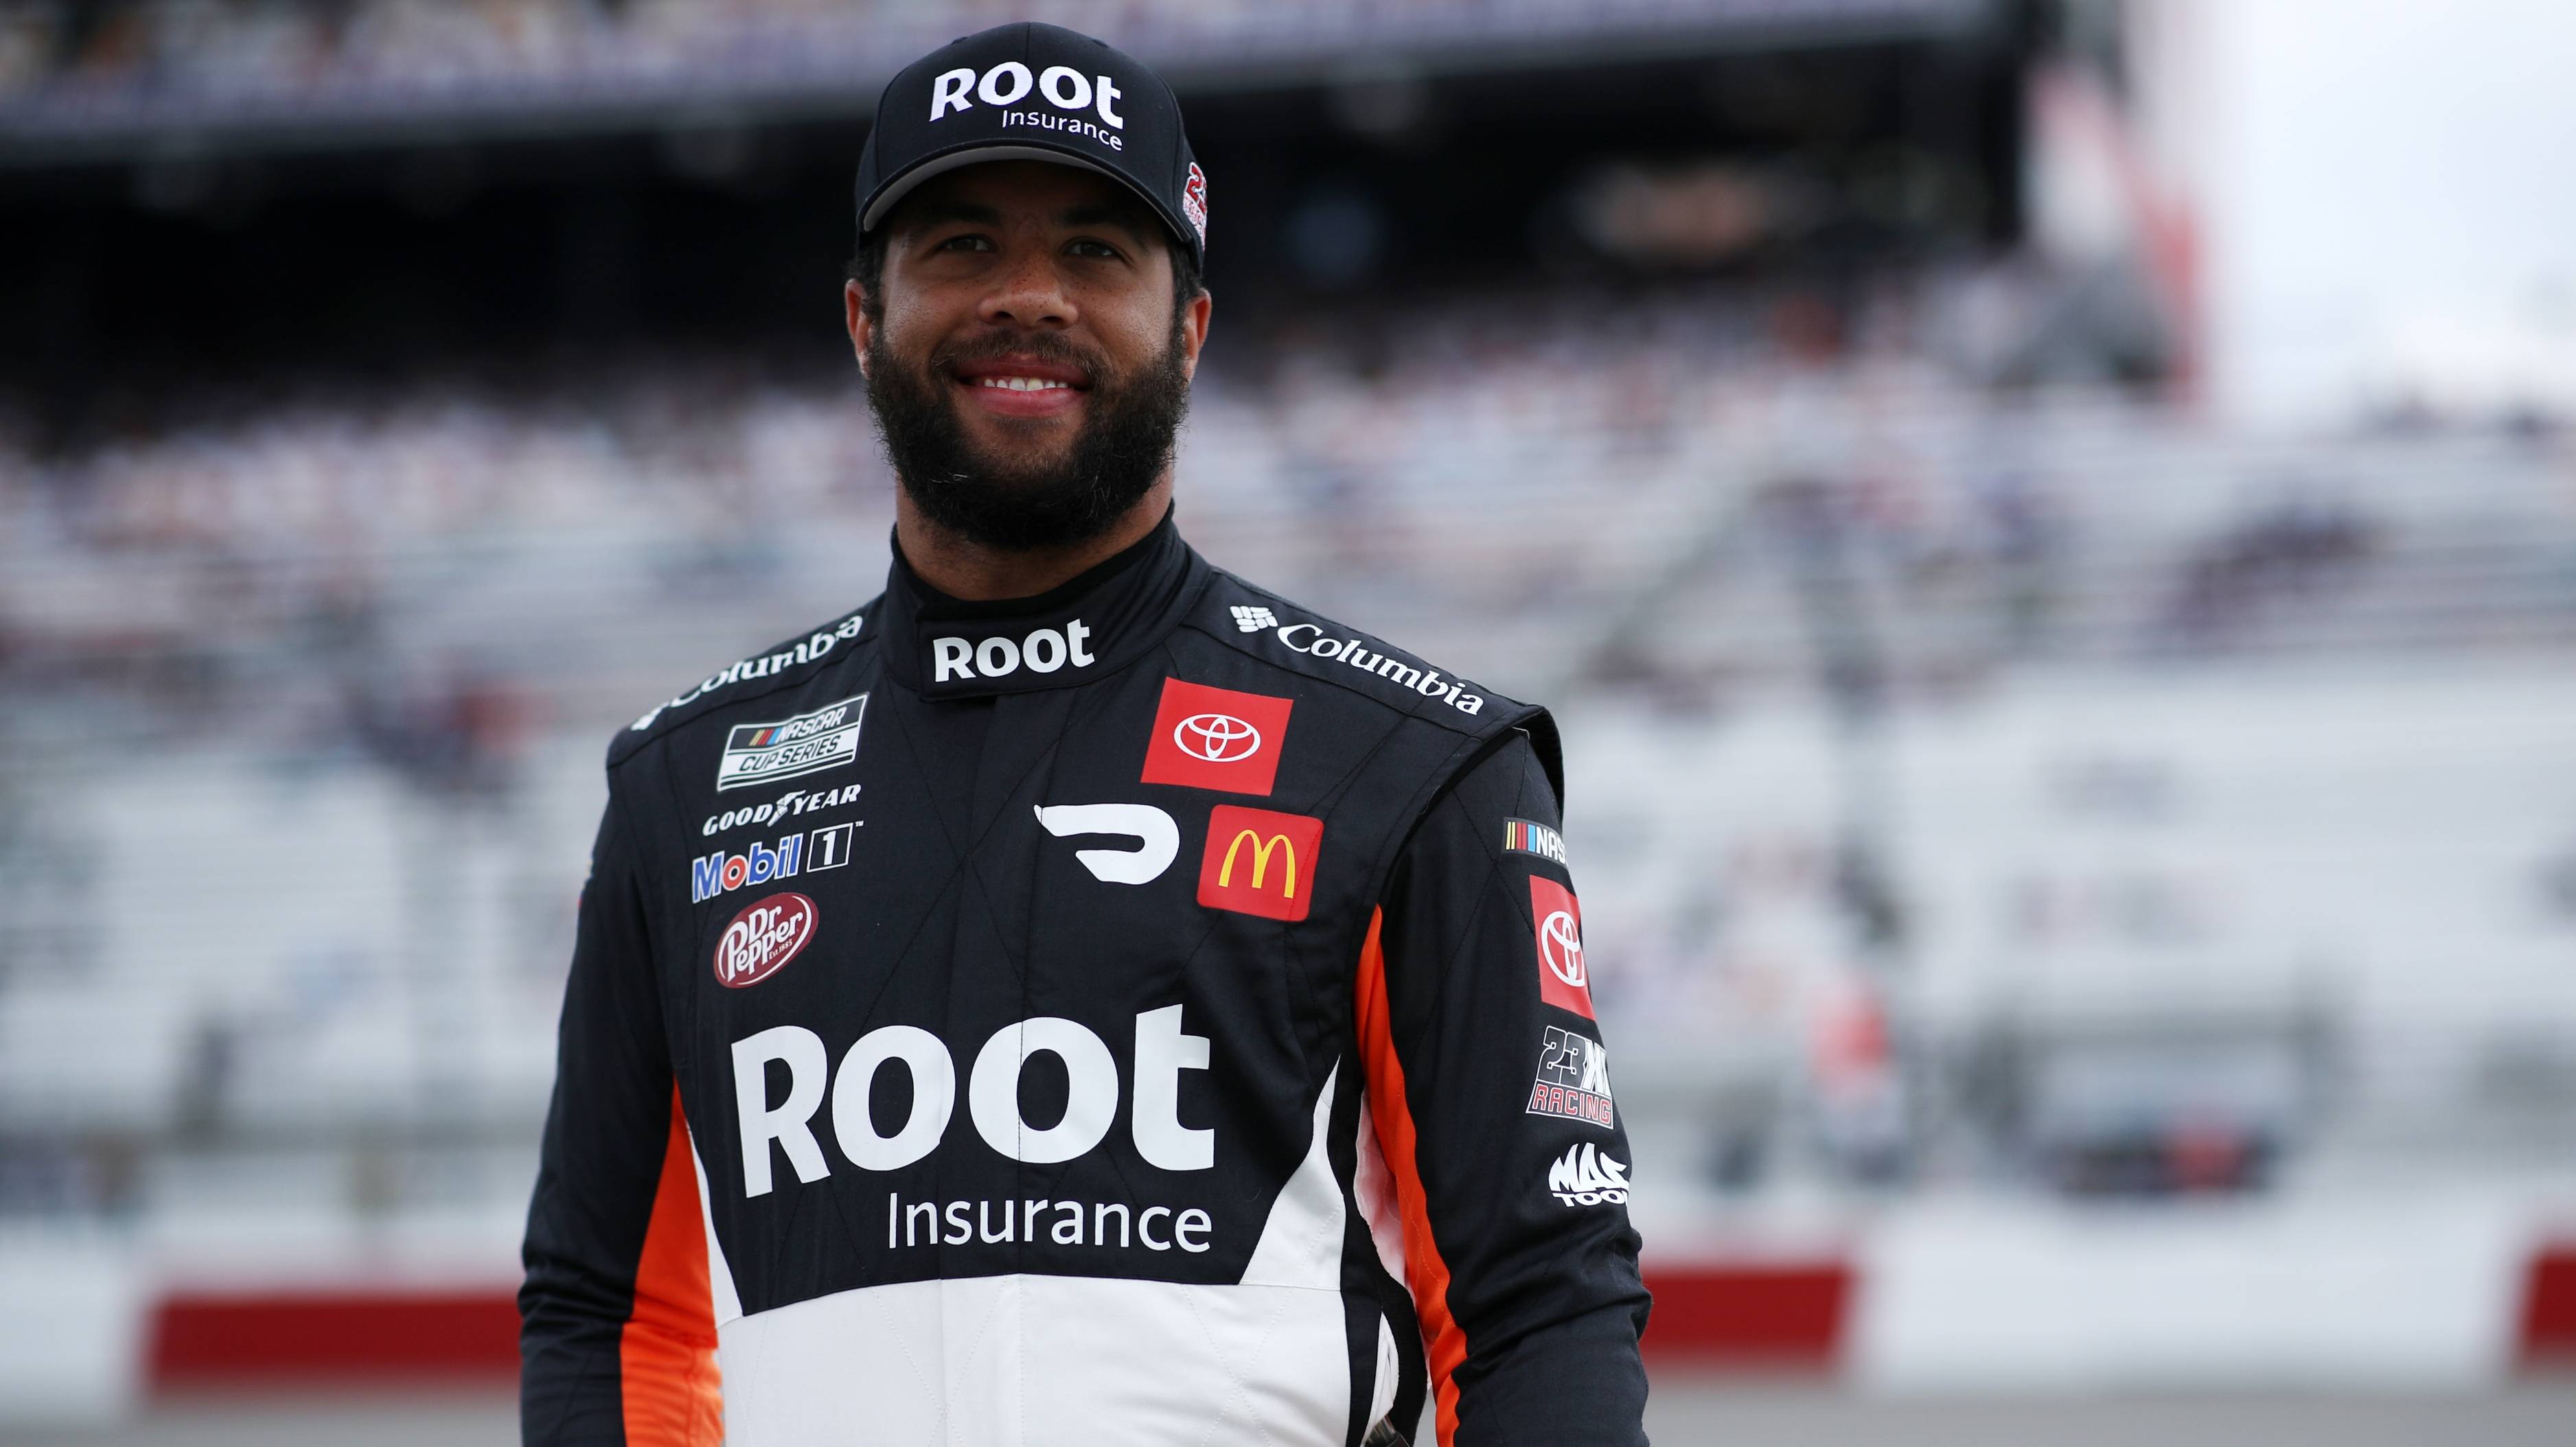 Bubba Wallace, driver of the #23 Root Insurance Toyota, poses on the grid prior to the NASCAR Cup Series Toyota Owners 400 at Richmond Raceway on April 18, 2021 in Richmond, Virginia. 